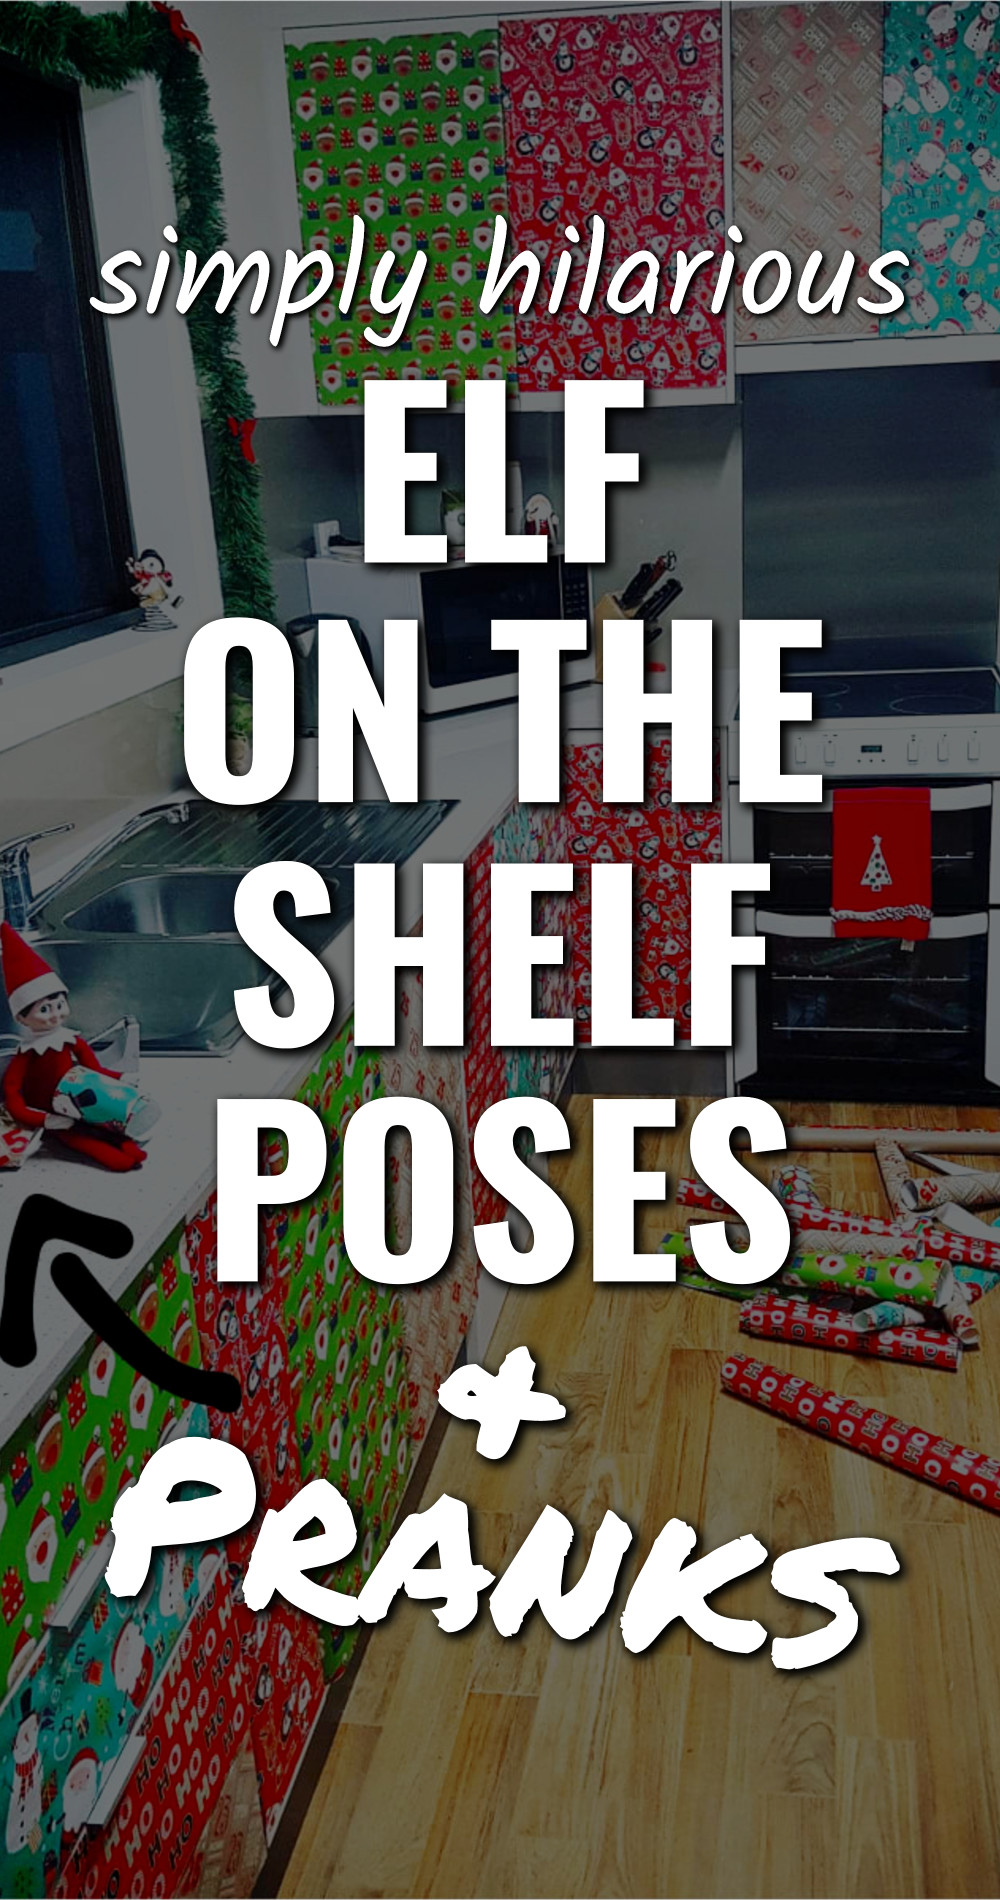 simple hilarious elf on the shelf poses and pranks